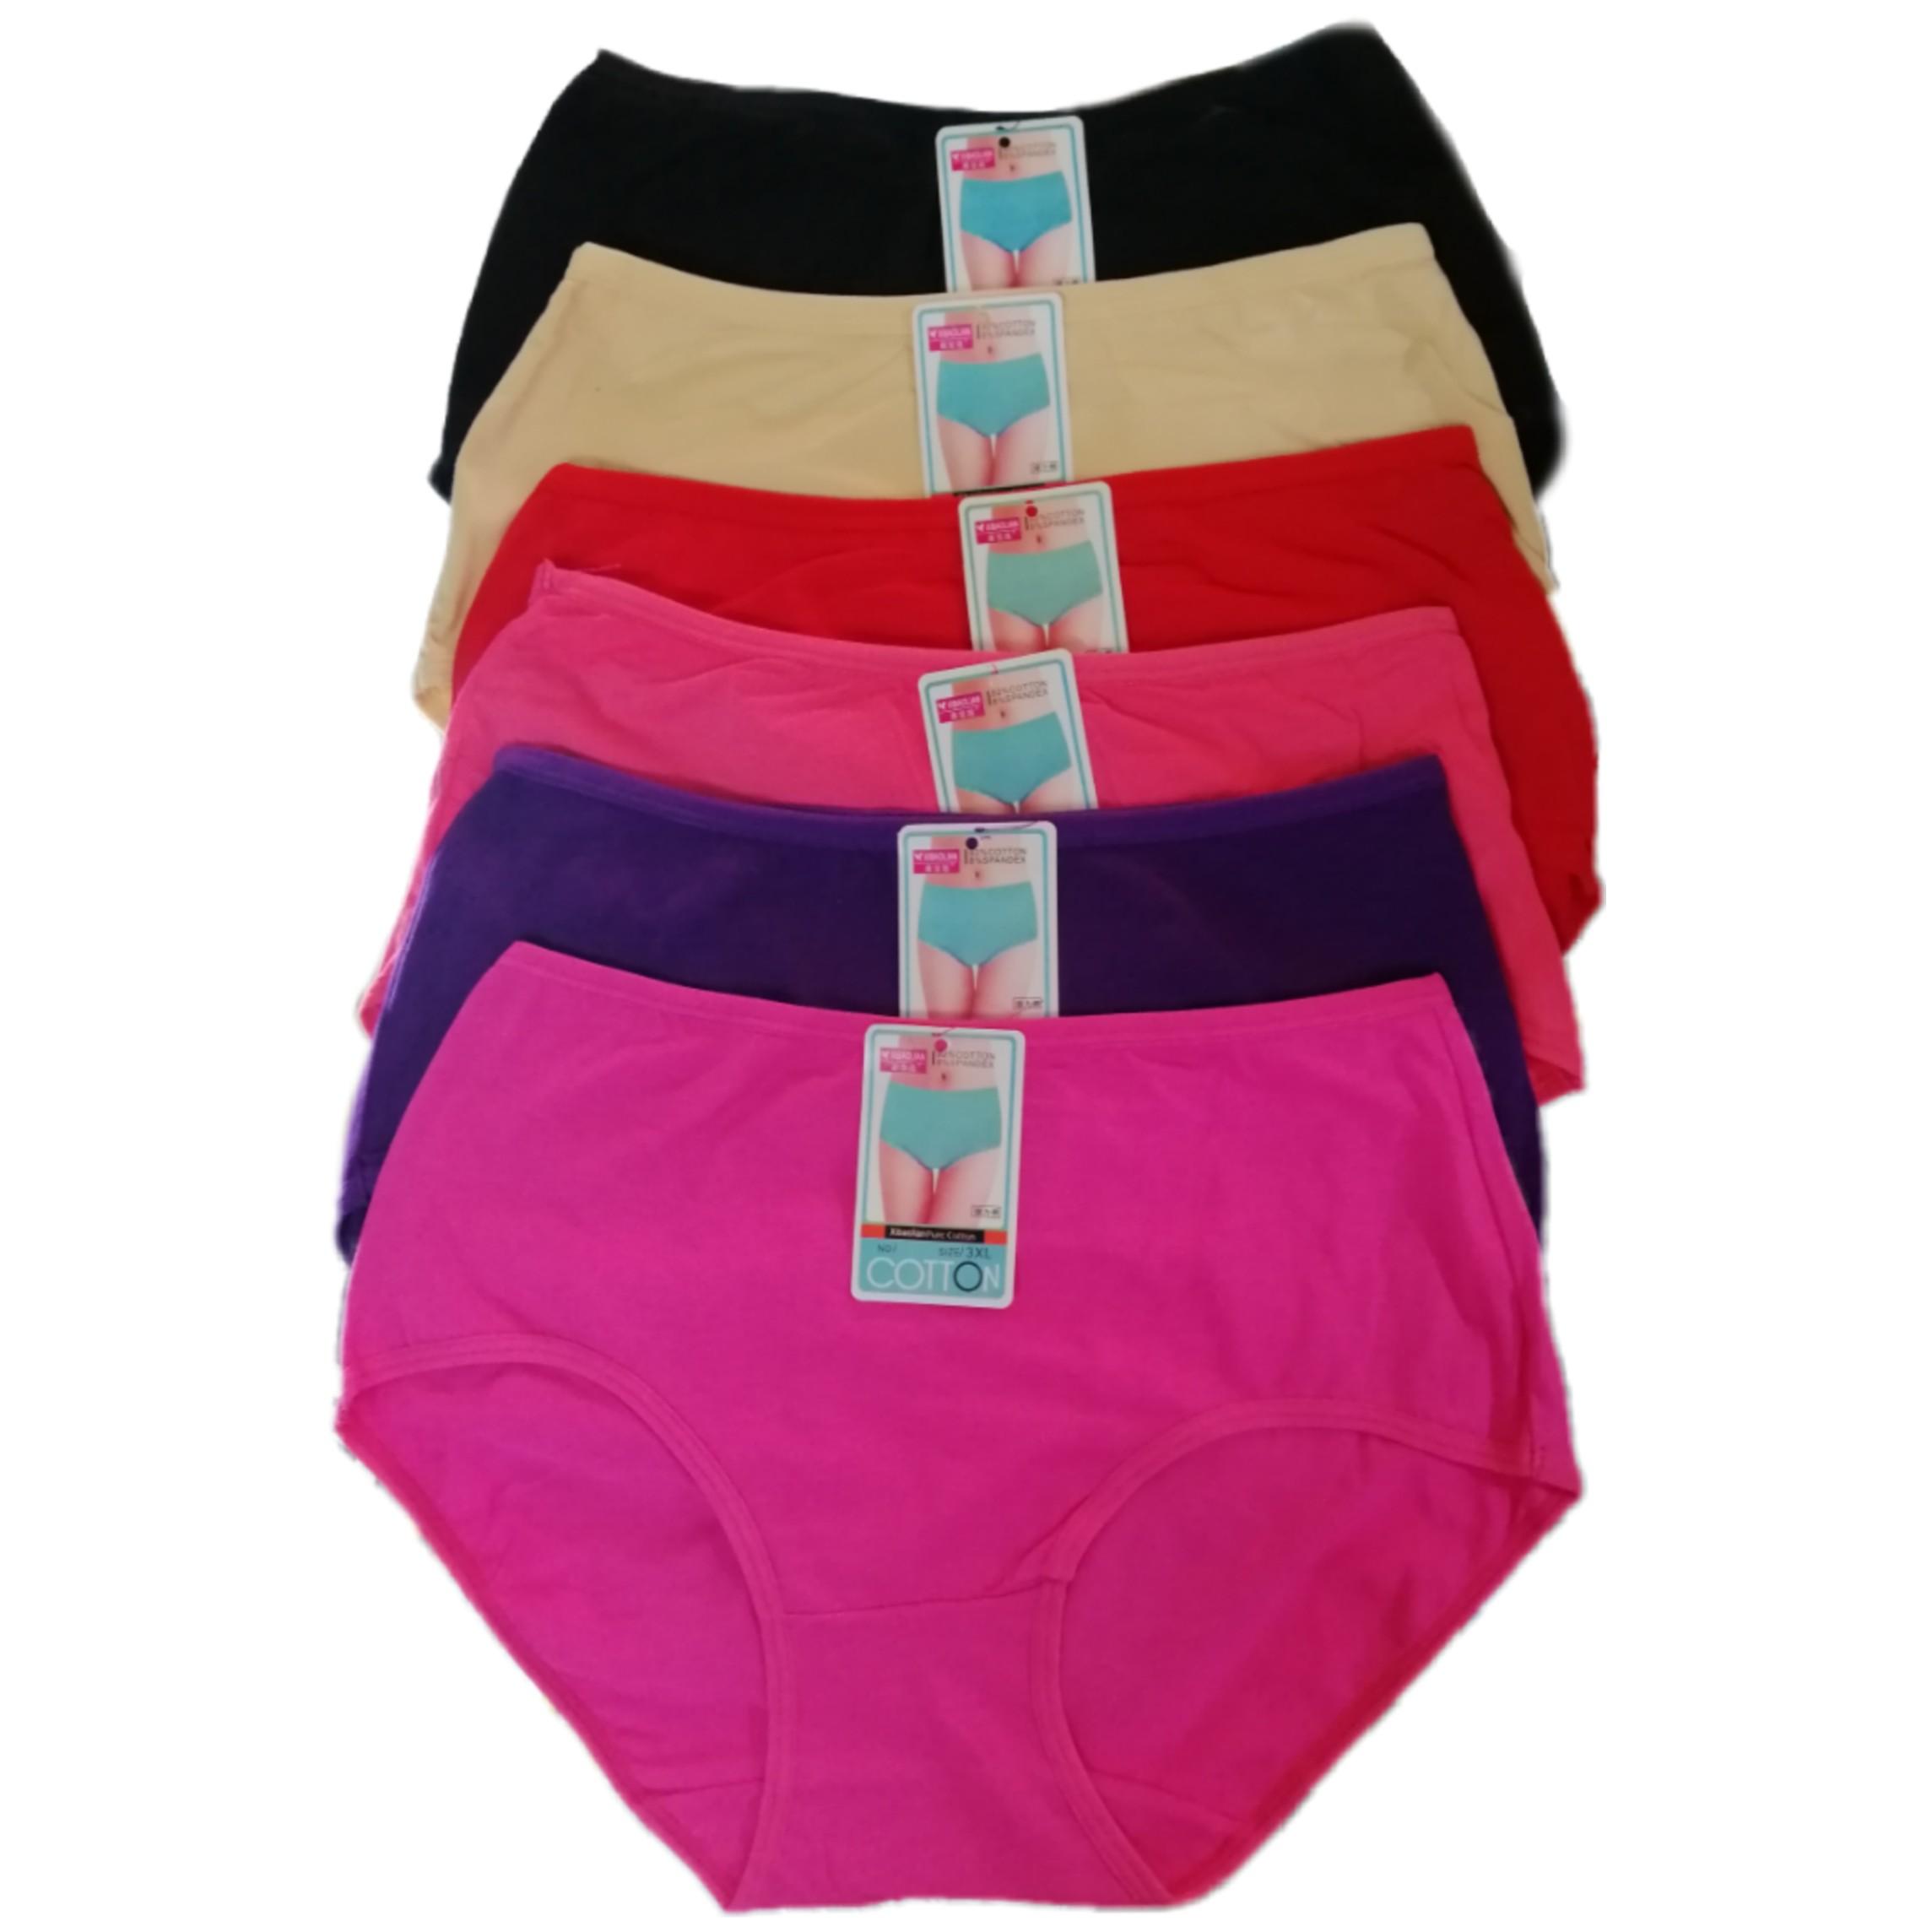 6 pcs Plus size Pull panty for women fit from XL to 3XL